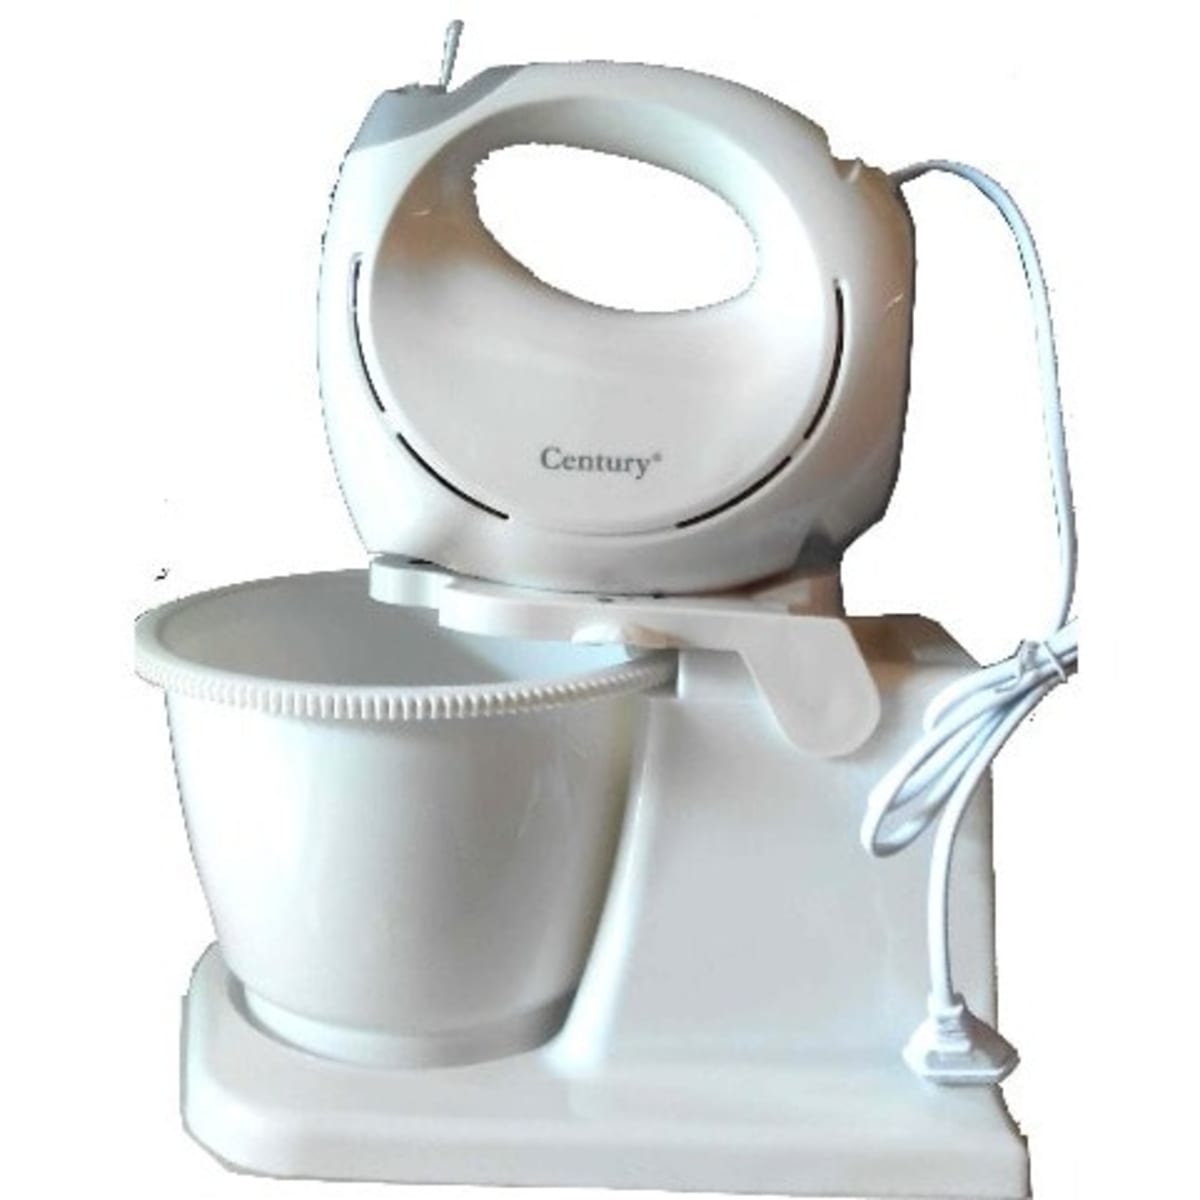 Hand Mixer: Buy Hand Mixers Online at Low Prices in India - Amazon.in